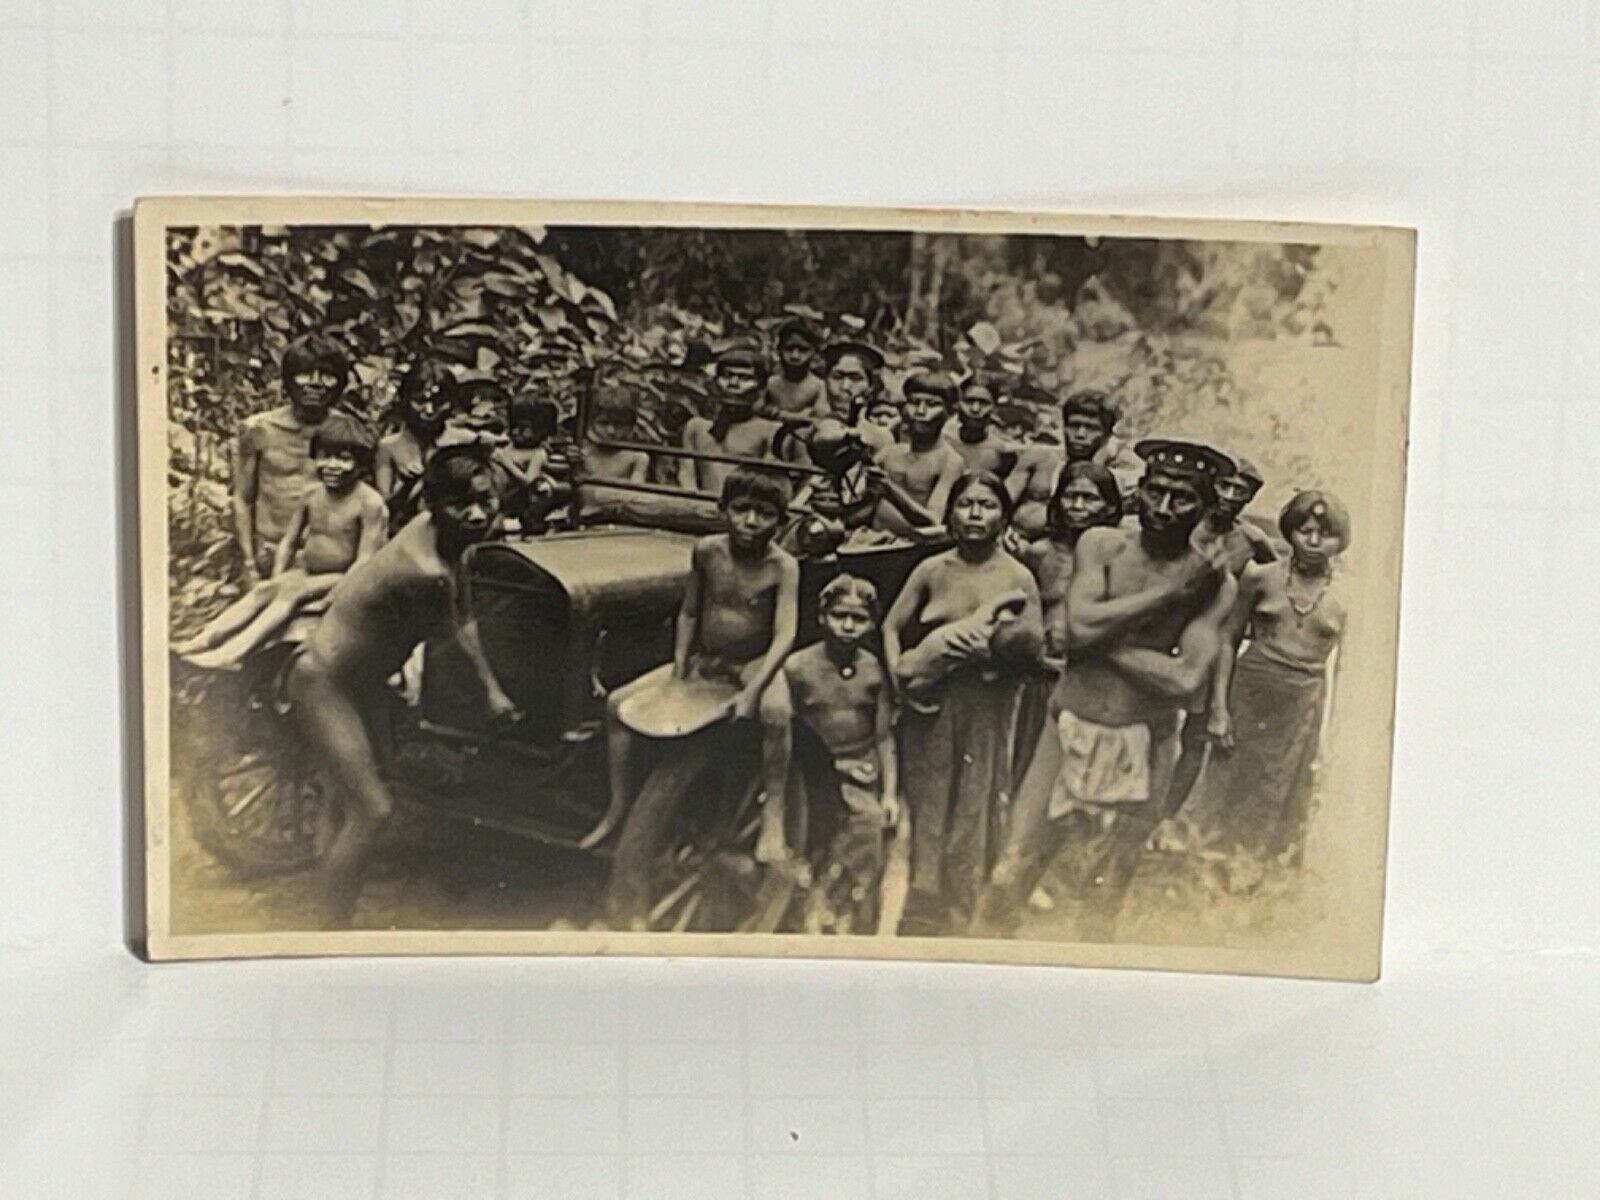 Postcard RPPC Aimore Indians Pose by Old Car Brazil Photo by Walter Garbe